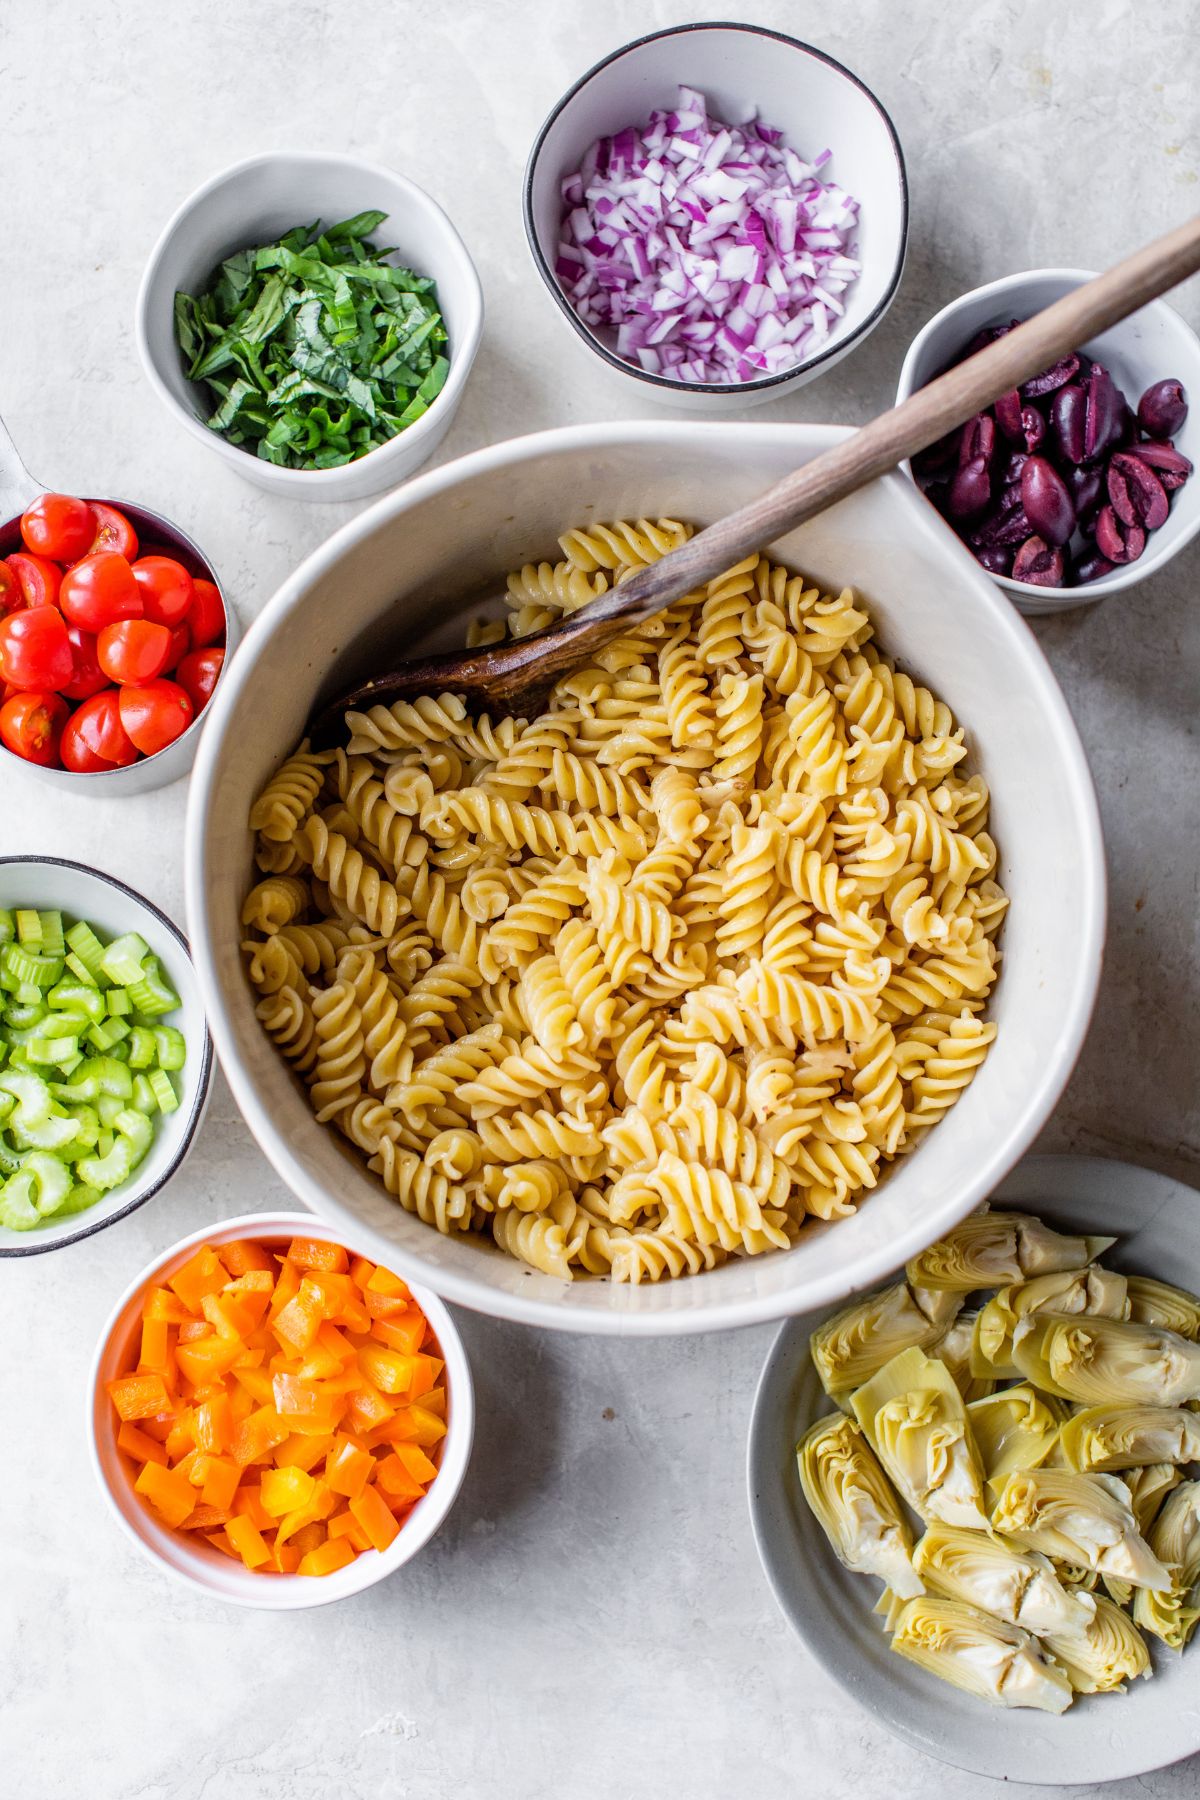 Ingredients for pasta salad divided into separate bowls.